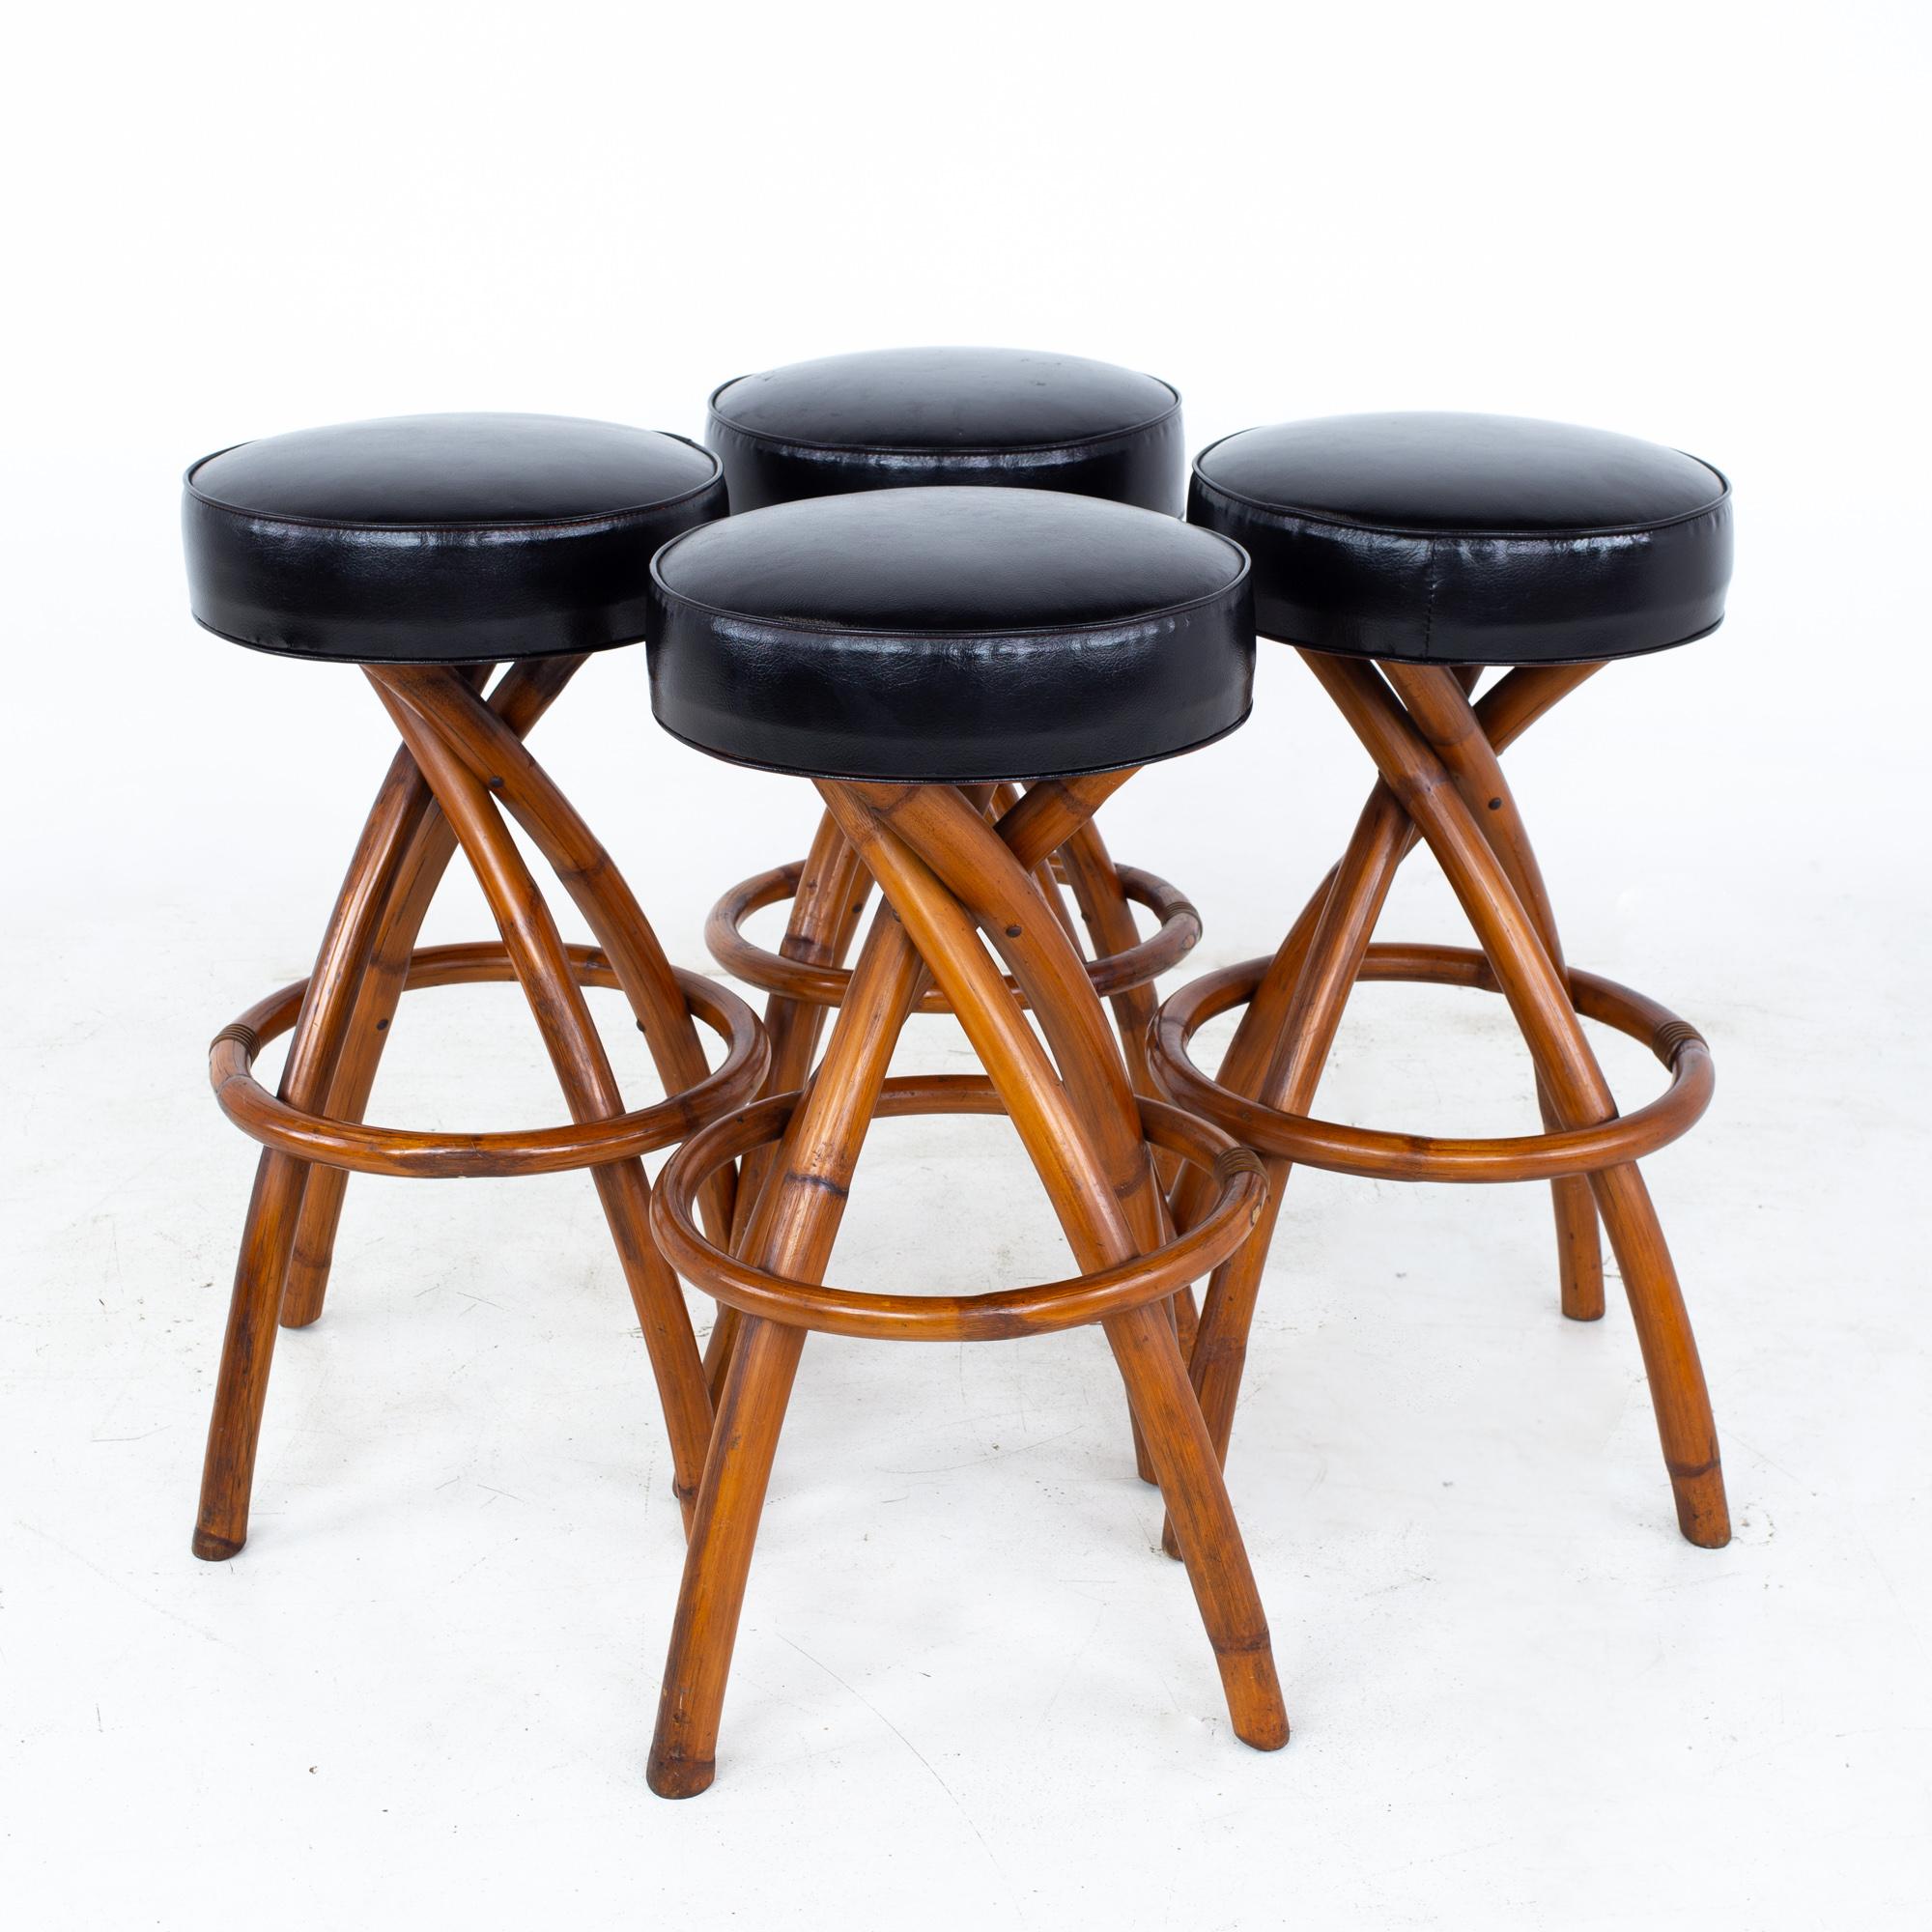 Paul Frankl mid century bamboo swivel bar stools - Set of 4
Each stool measures: 21.5 wide x 21.5 deep x 29.75 inches high, with a seat height/chair clearance of 29.75 inches 

All pieces of furniture can be had in what we call restored vintage